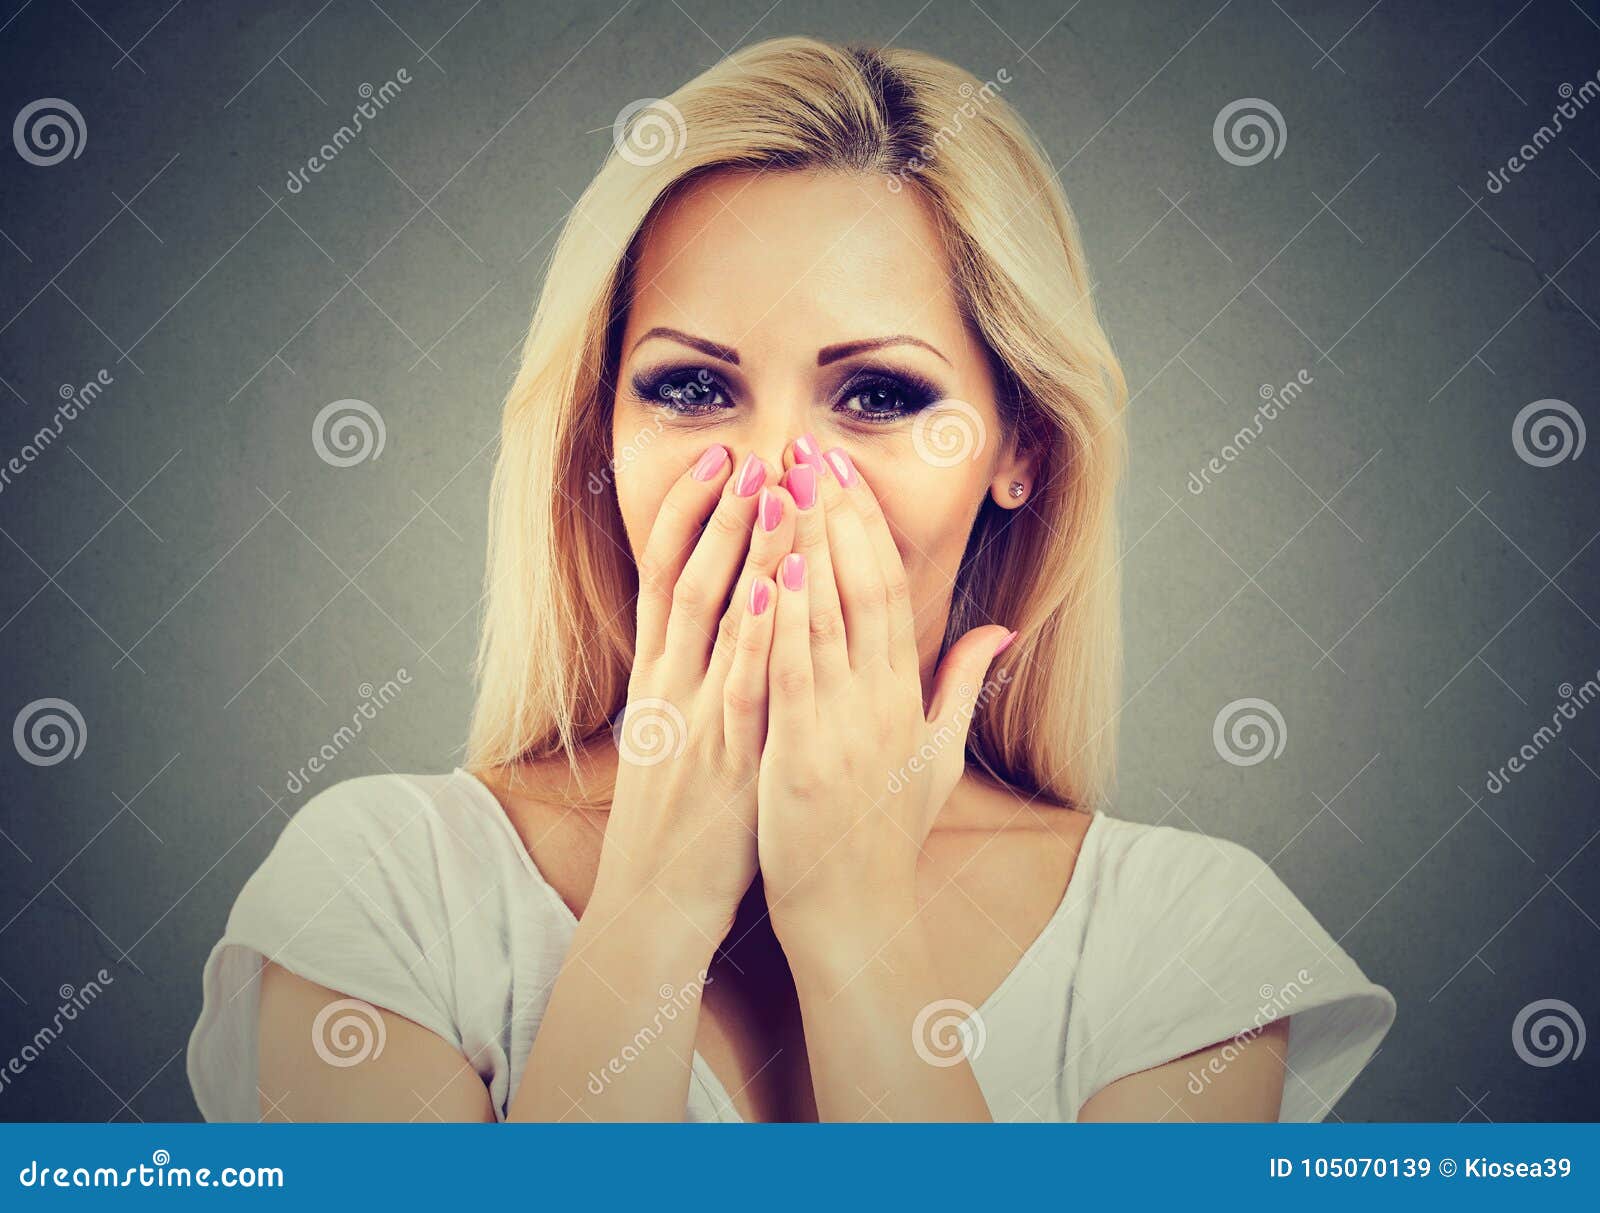 Portrait Of A Happy Woman Being Shy Laughing And Covering Face With Hands Stock Image Image Of